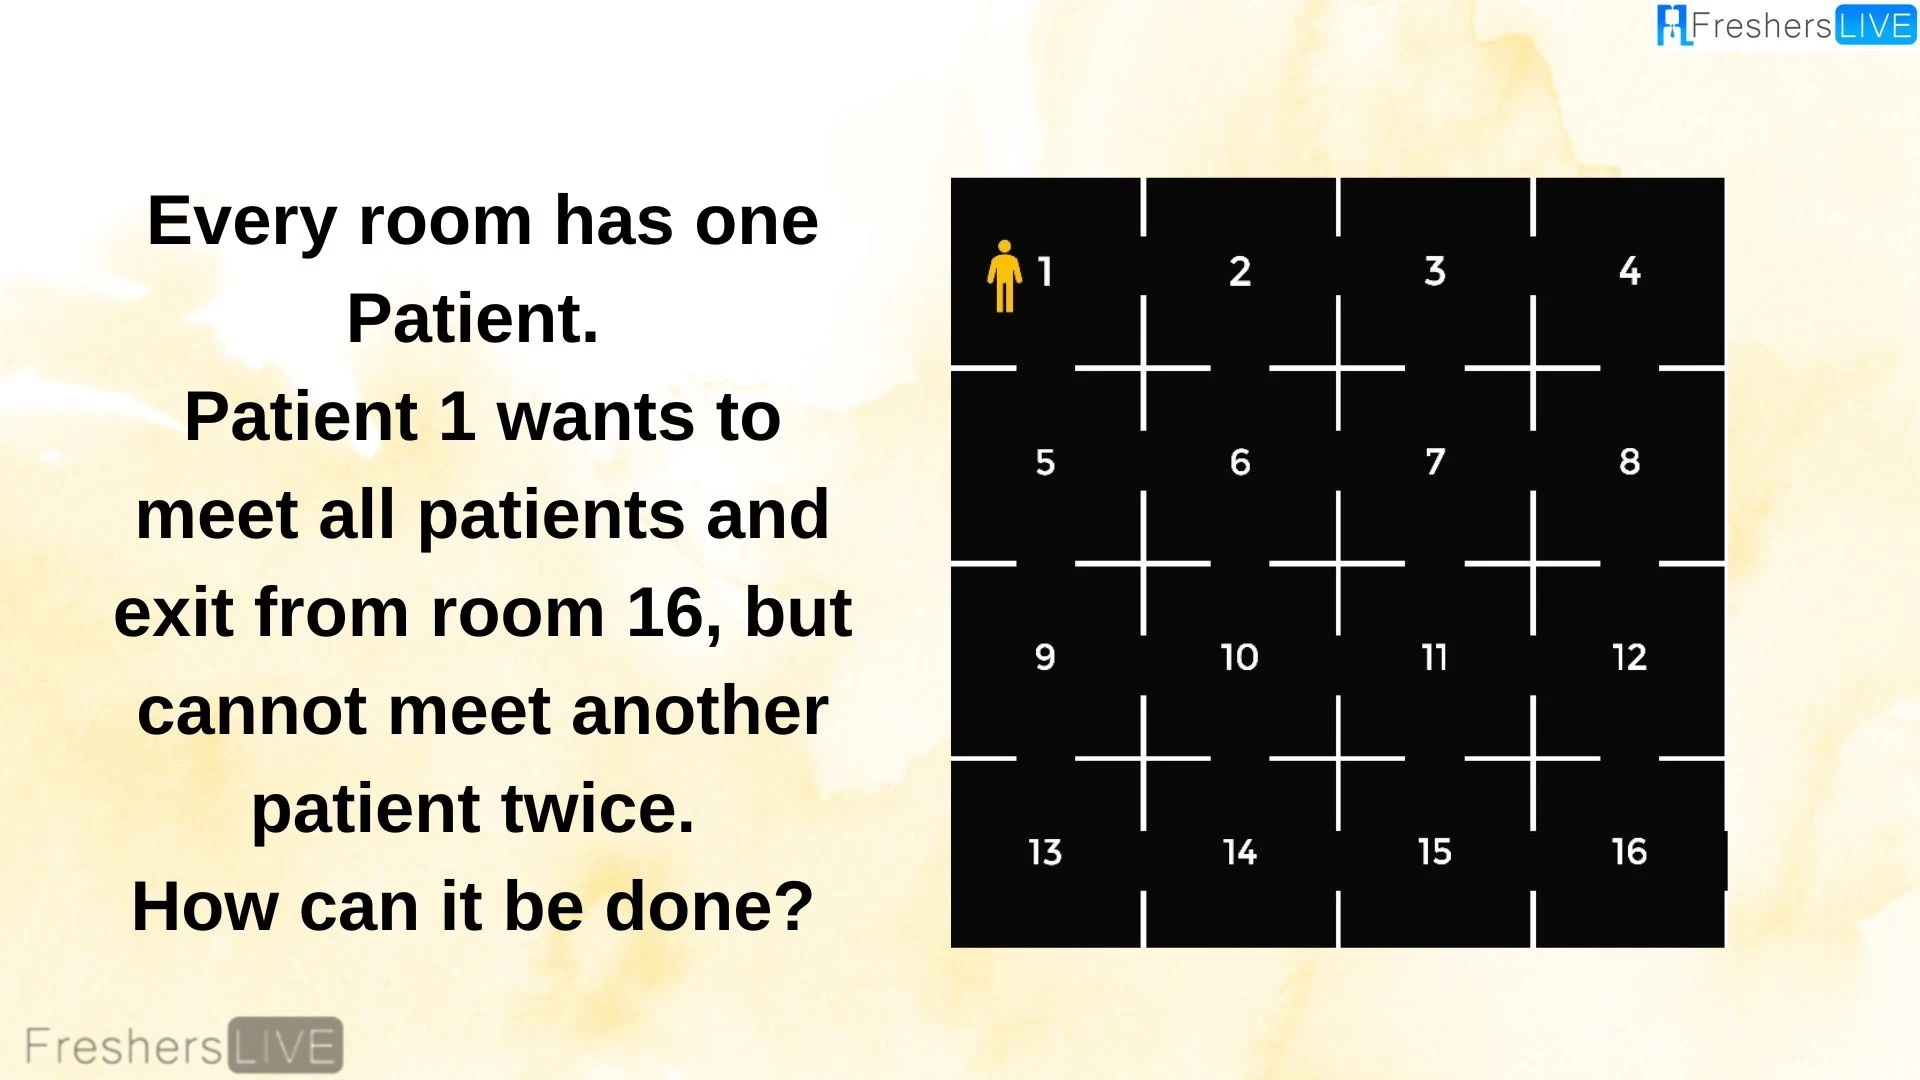 How Can You Solve the Impossible Escape Riddle?